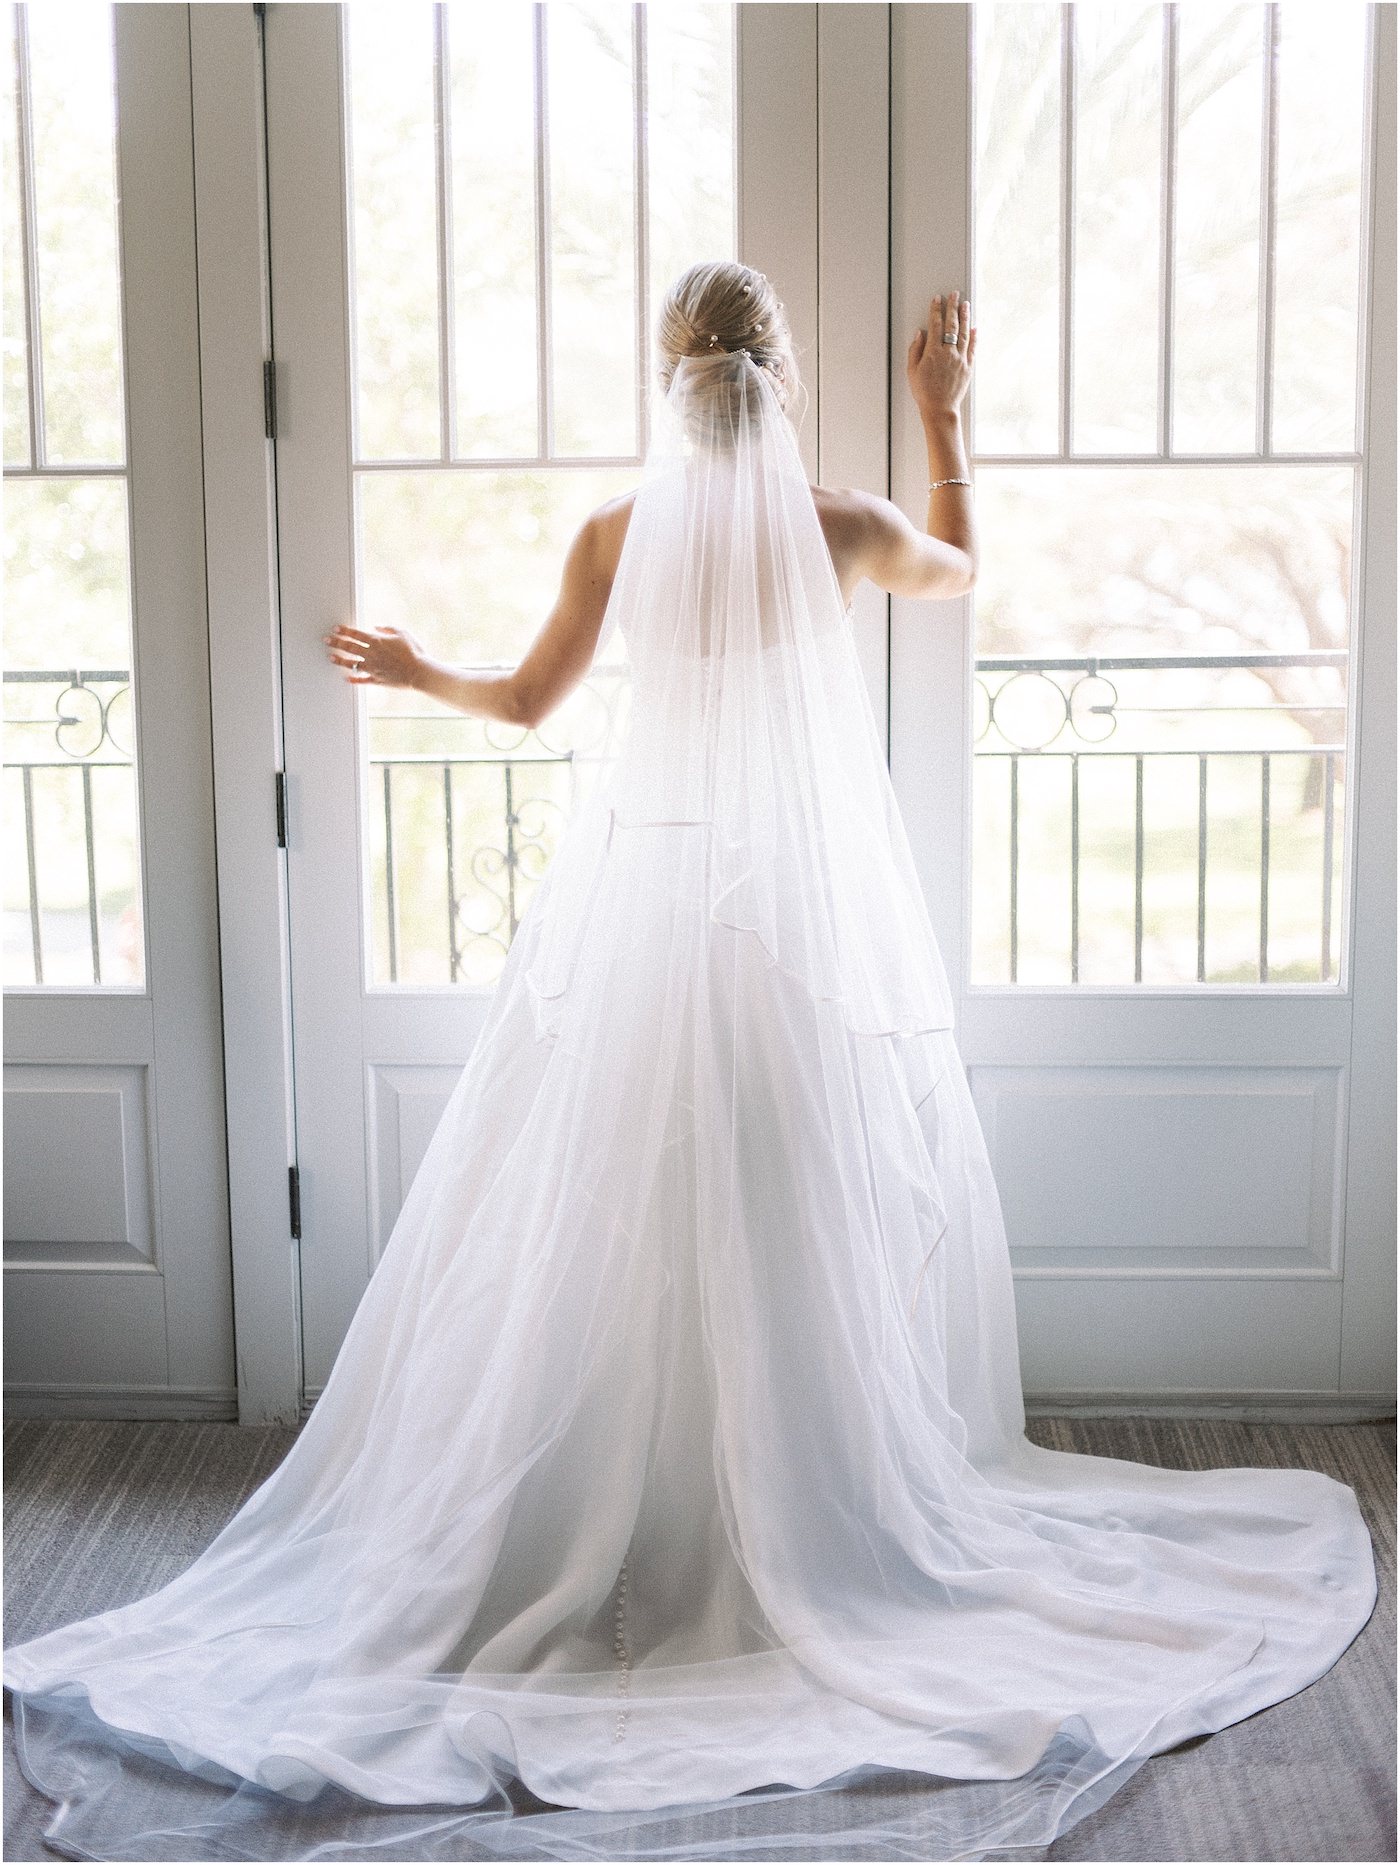 Bride Wedding Gown with Cathedral Veil Portrait in Window